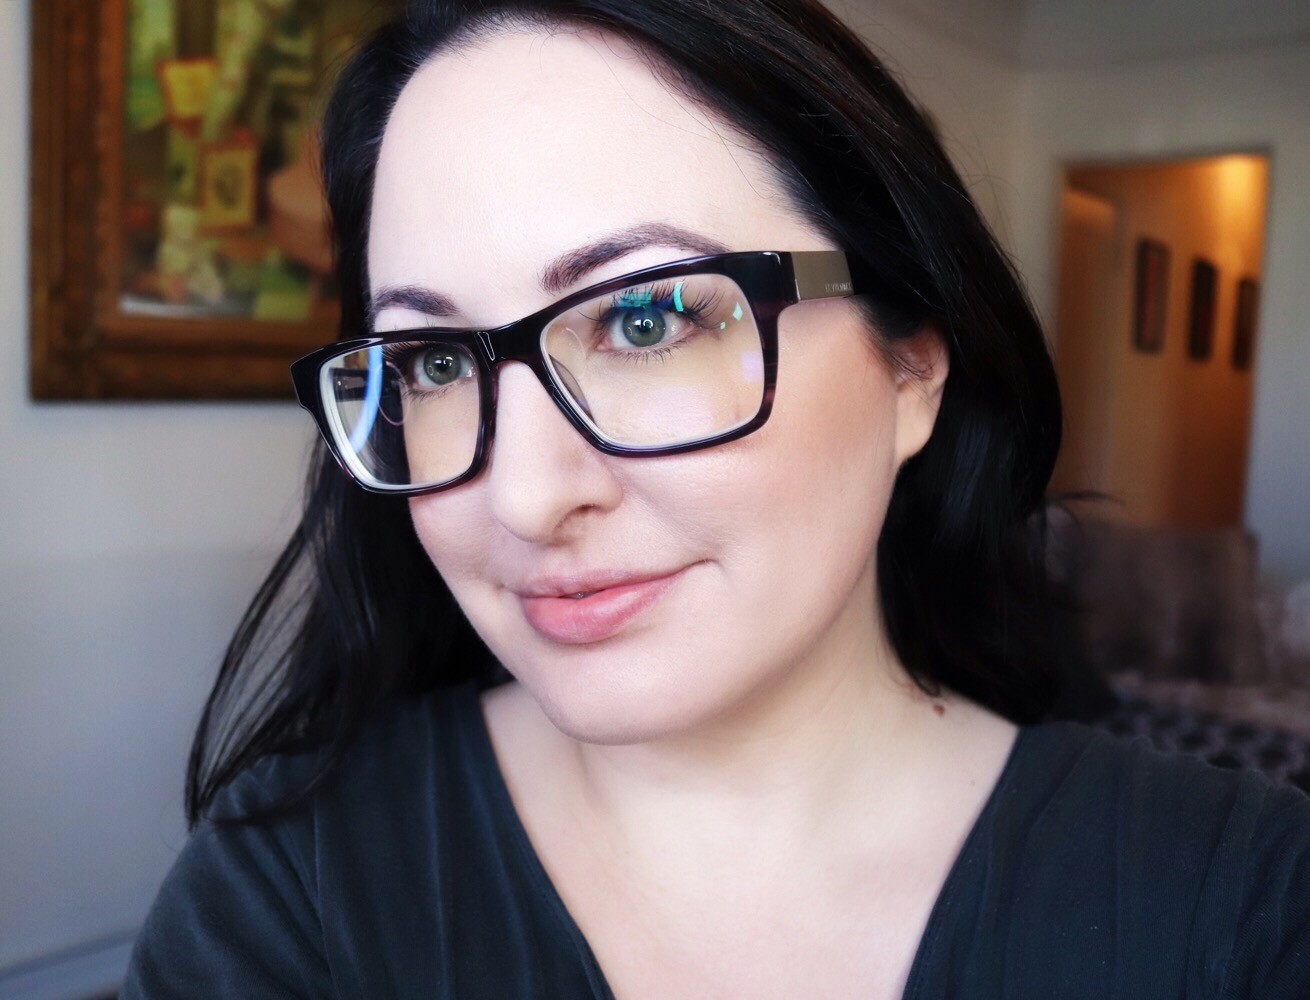 Michelle Lane Chelsea Eyeglass Frames Review by Popular Los Angeles Lifestyle Blogger, My Beauty Bunny - My New Specs and Shades From Coastal Eyewear featured by popular Los Angeles style blogger, My Beauty Bunny